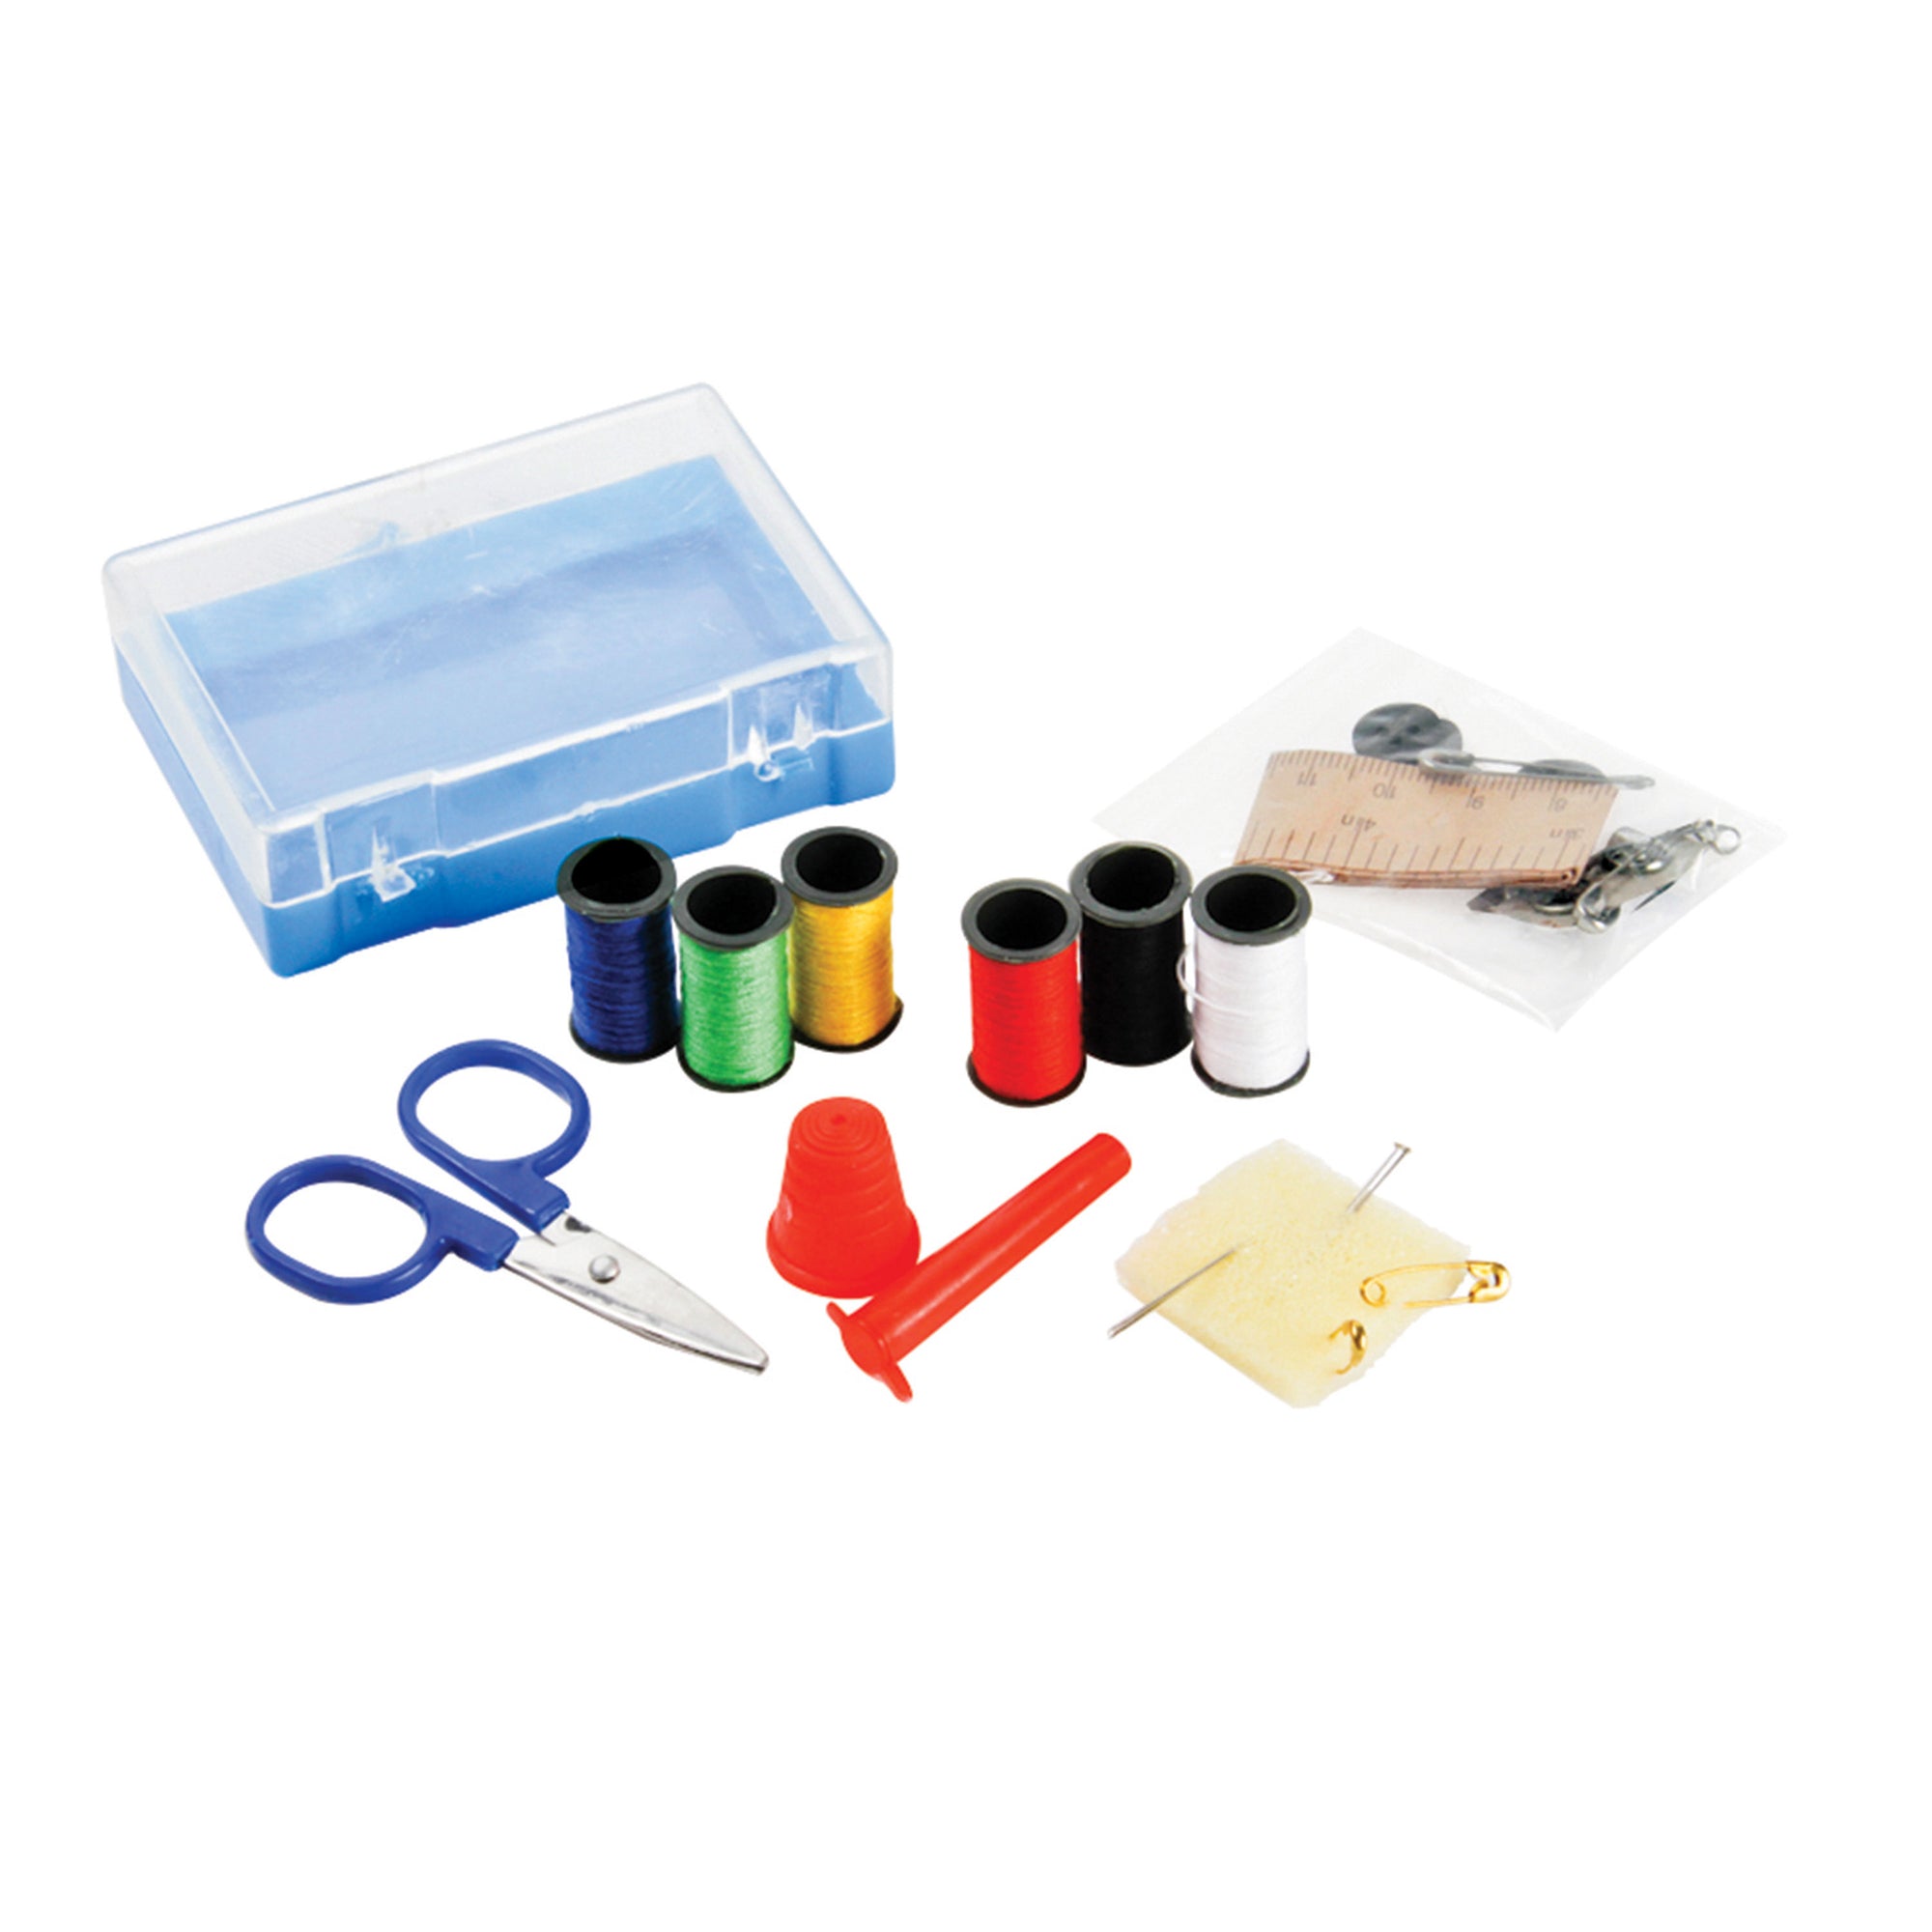 Camco 51053 Sewing Kit